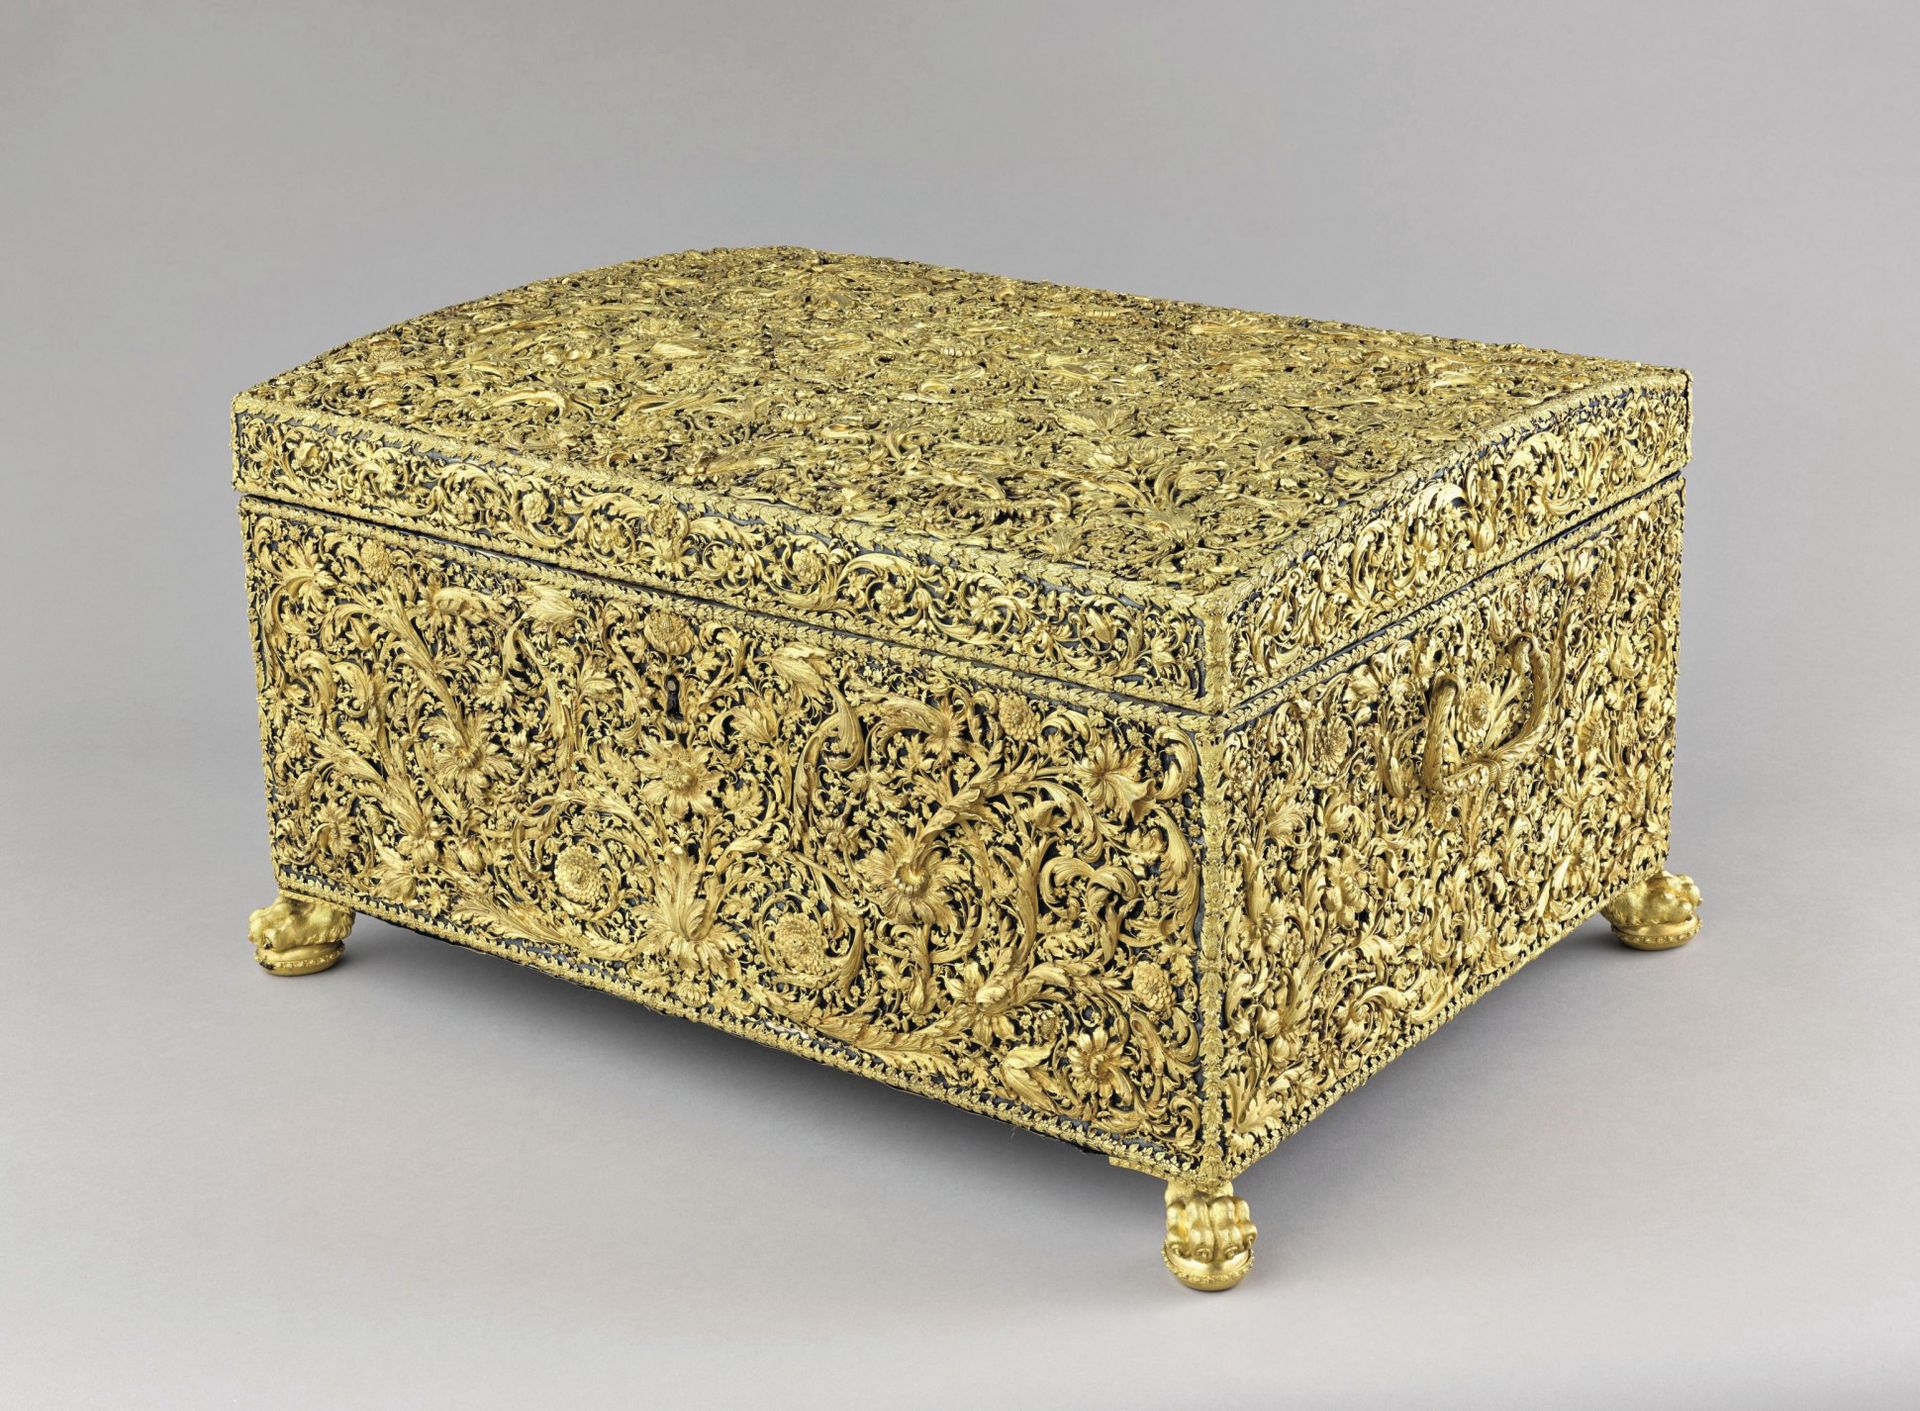 Louis XIV Design History, Furniture Fit For A King